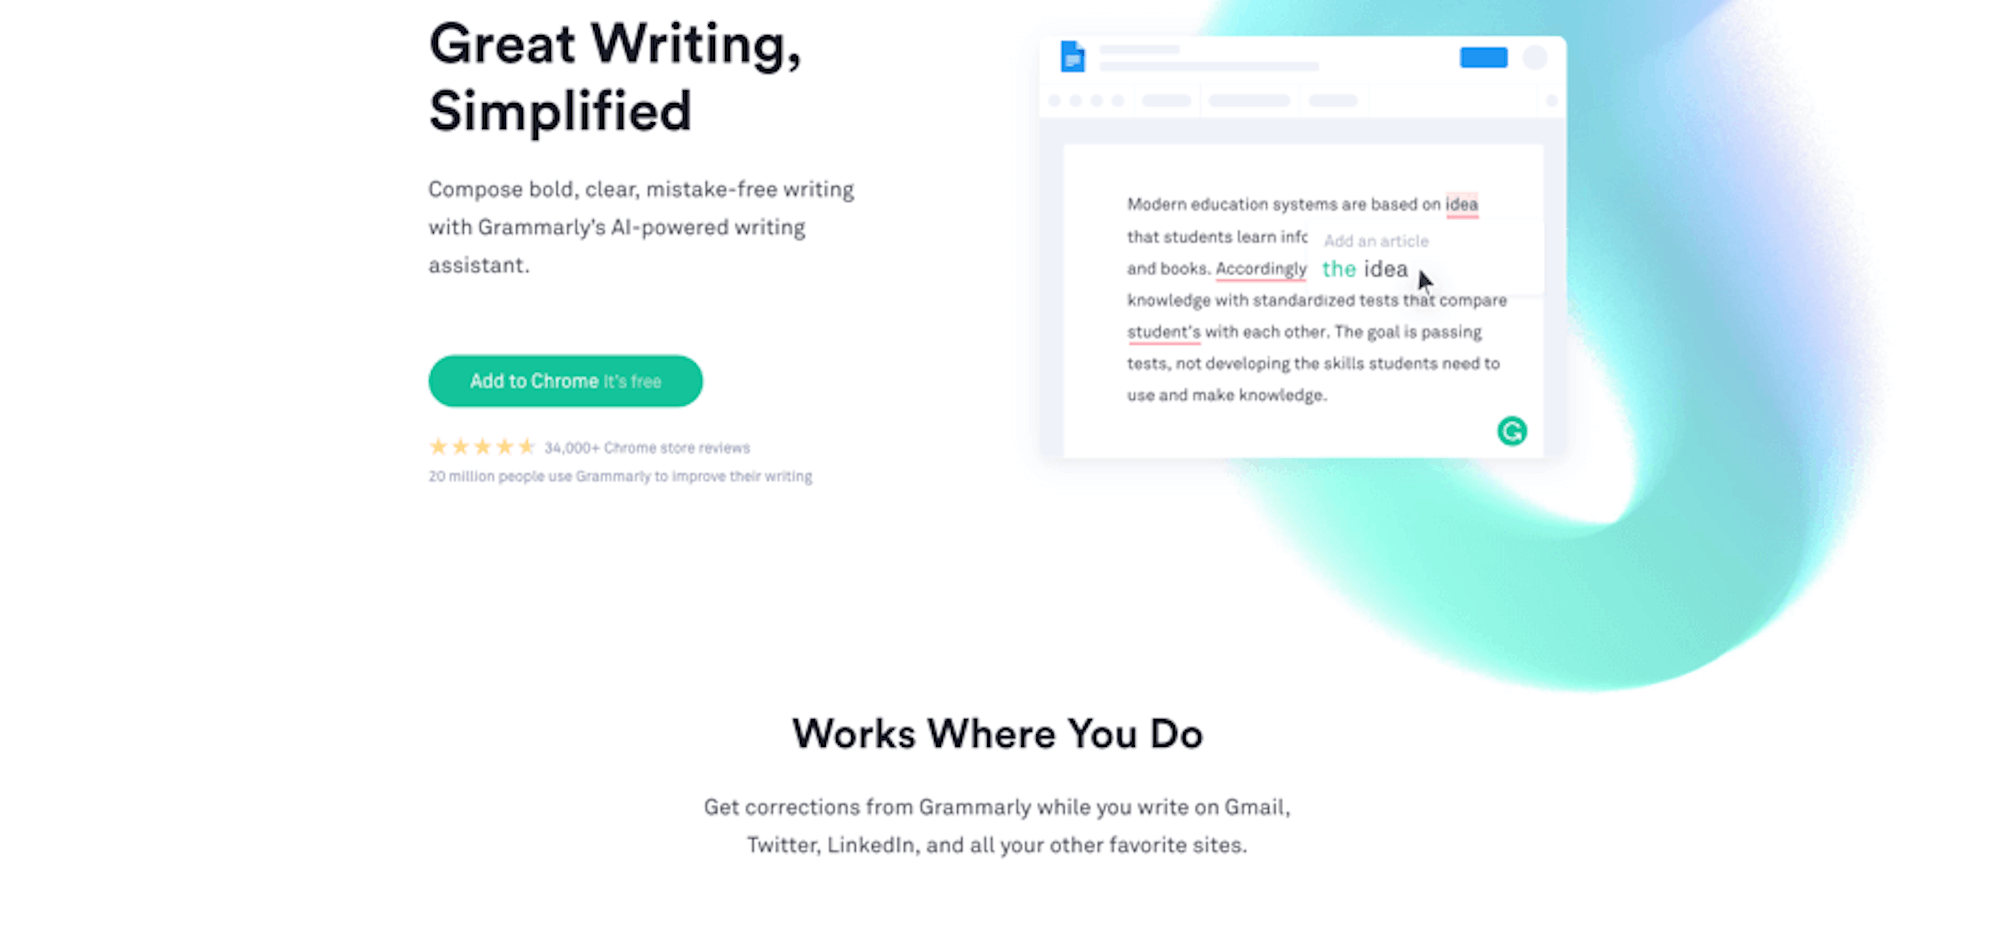 Grammarly's home page. The copy really connects with intended audience by highlighting pain points and how Grammarly can help.